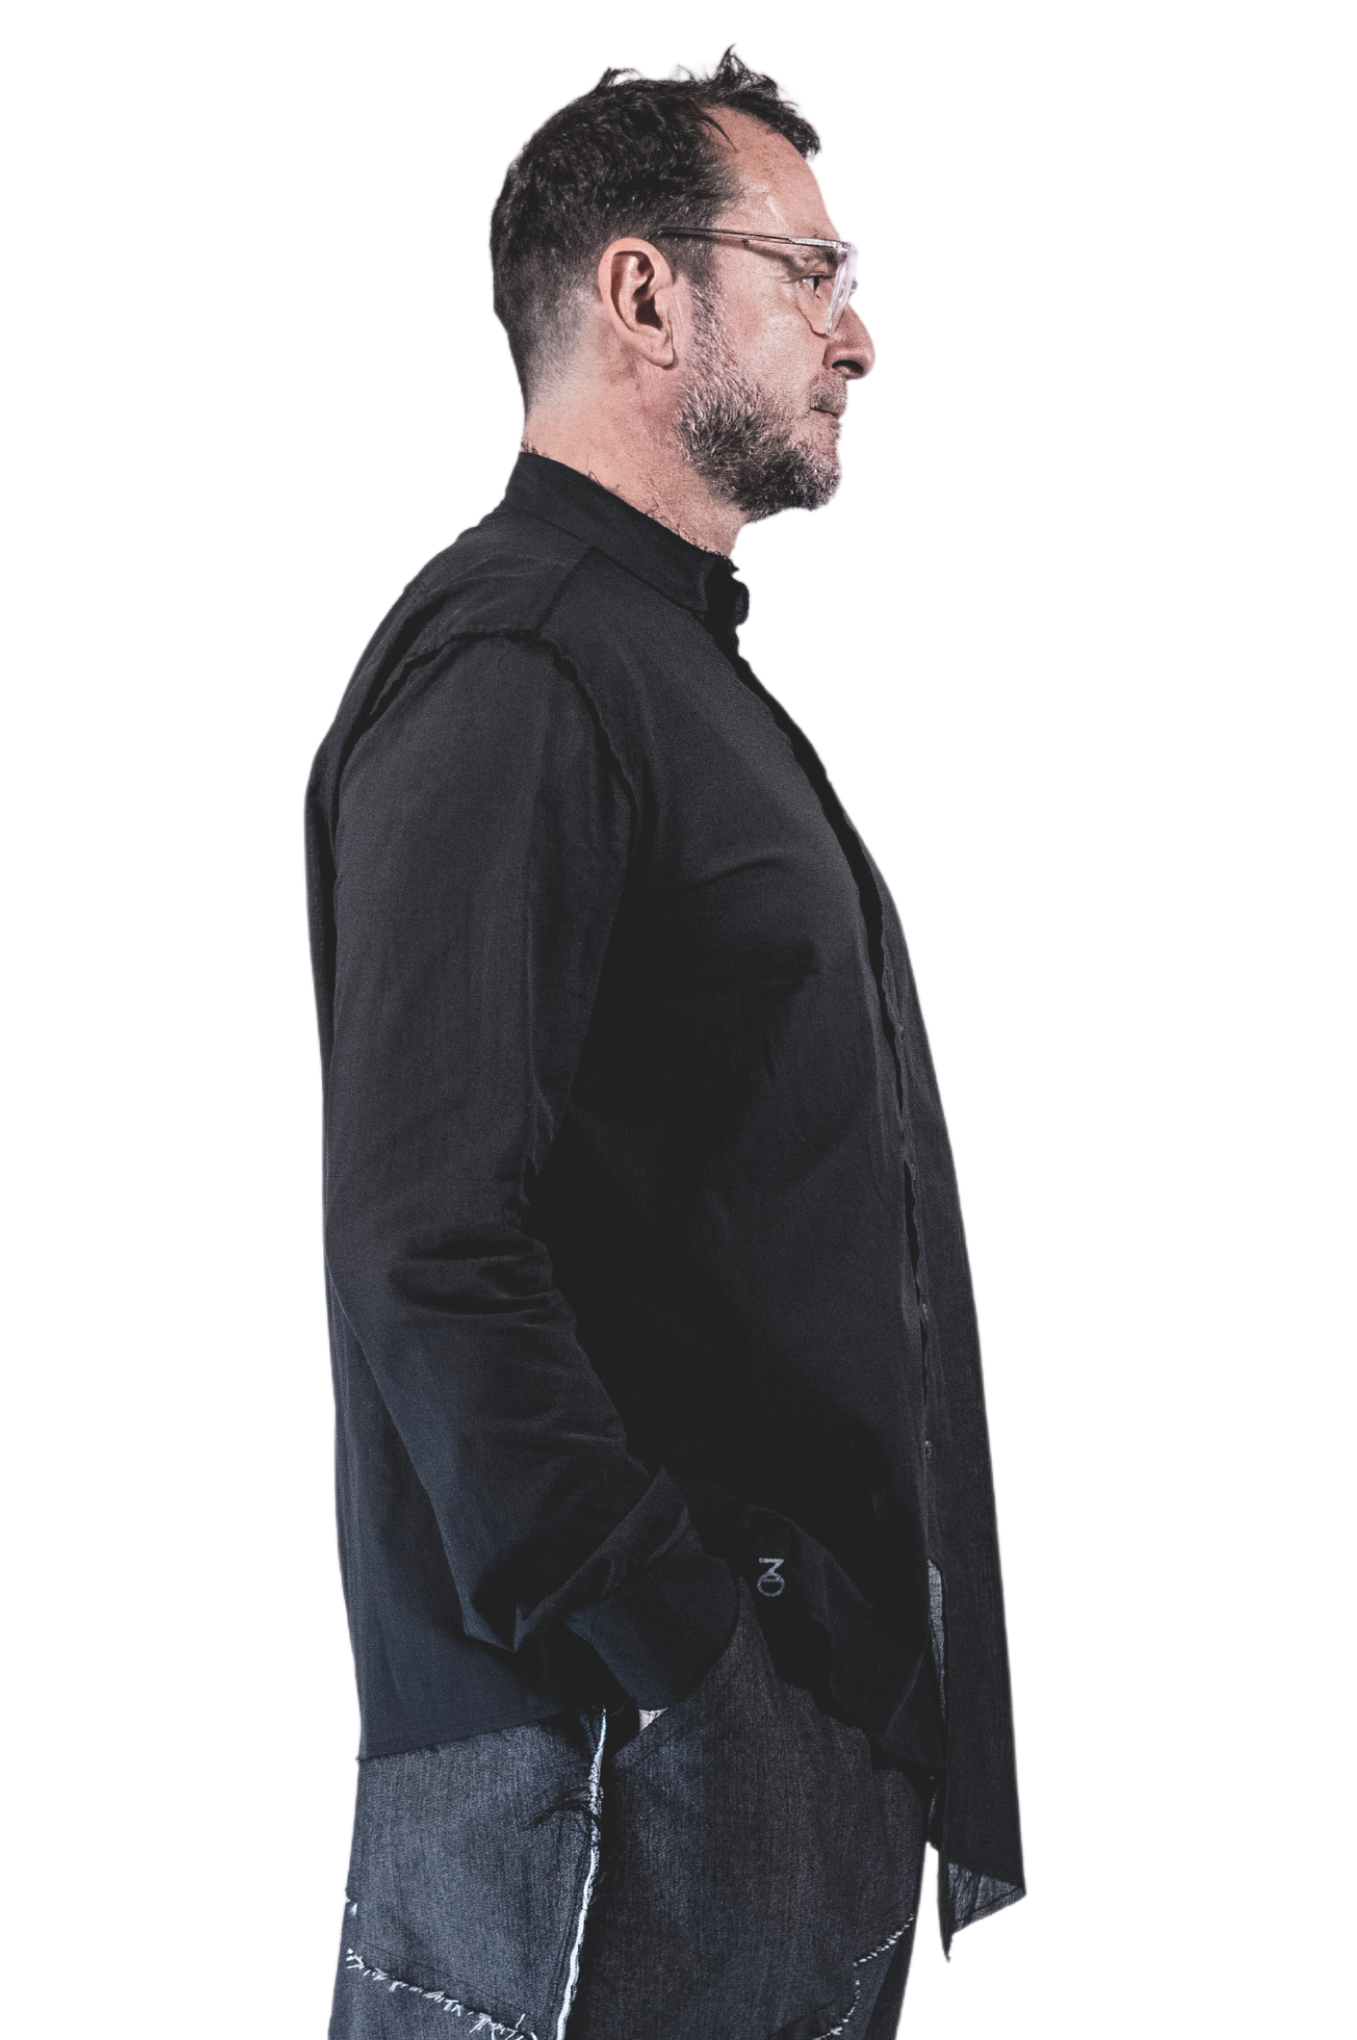 Twins Asymmetrical Shirt with Leather Buttons in BLACK Cotton